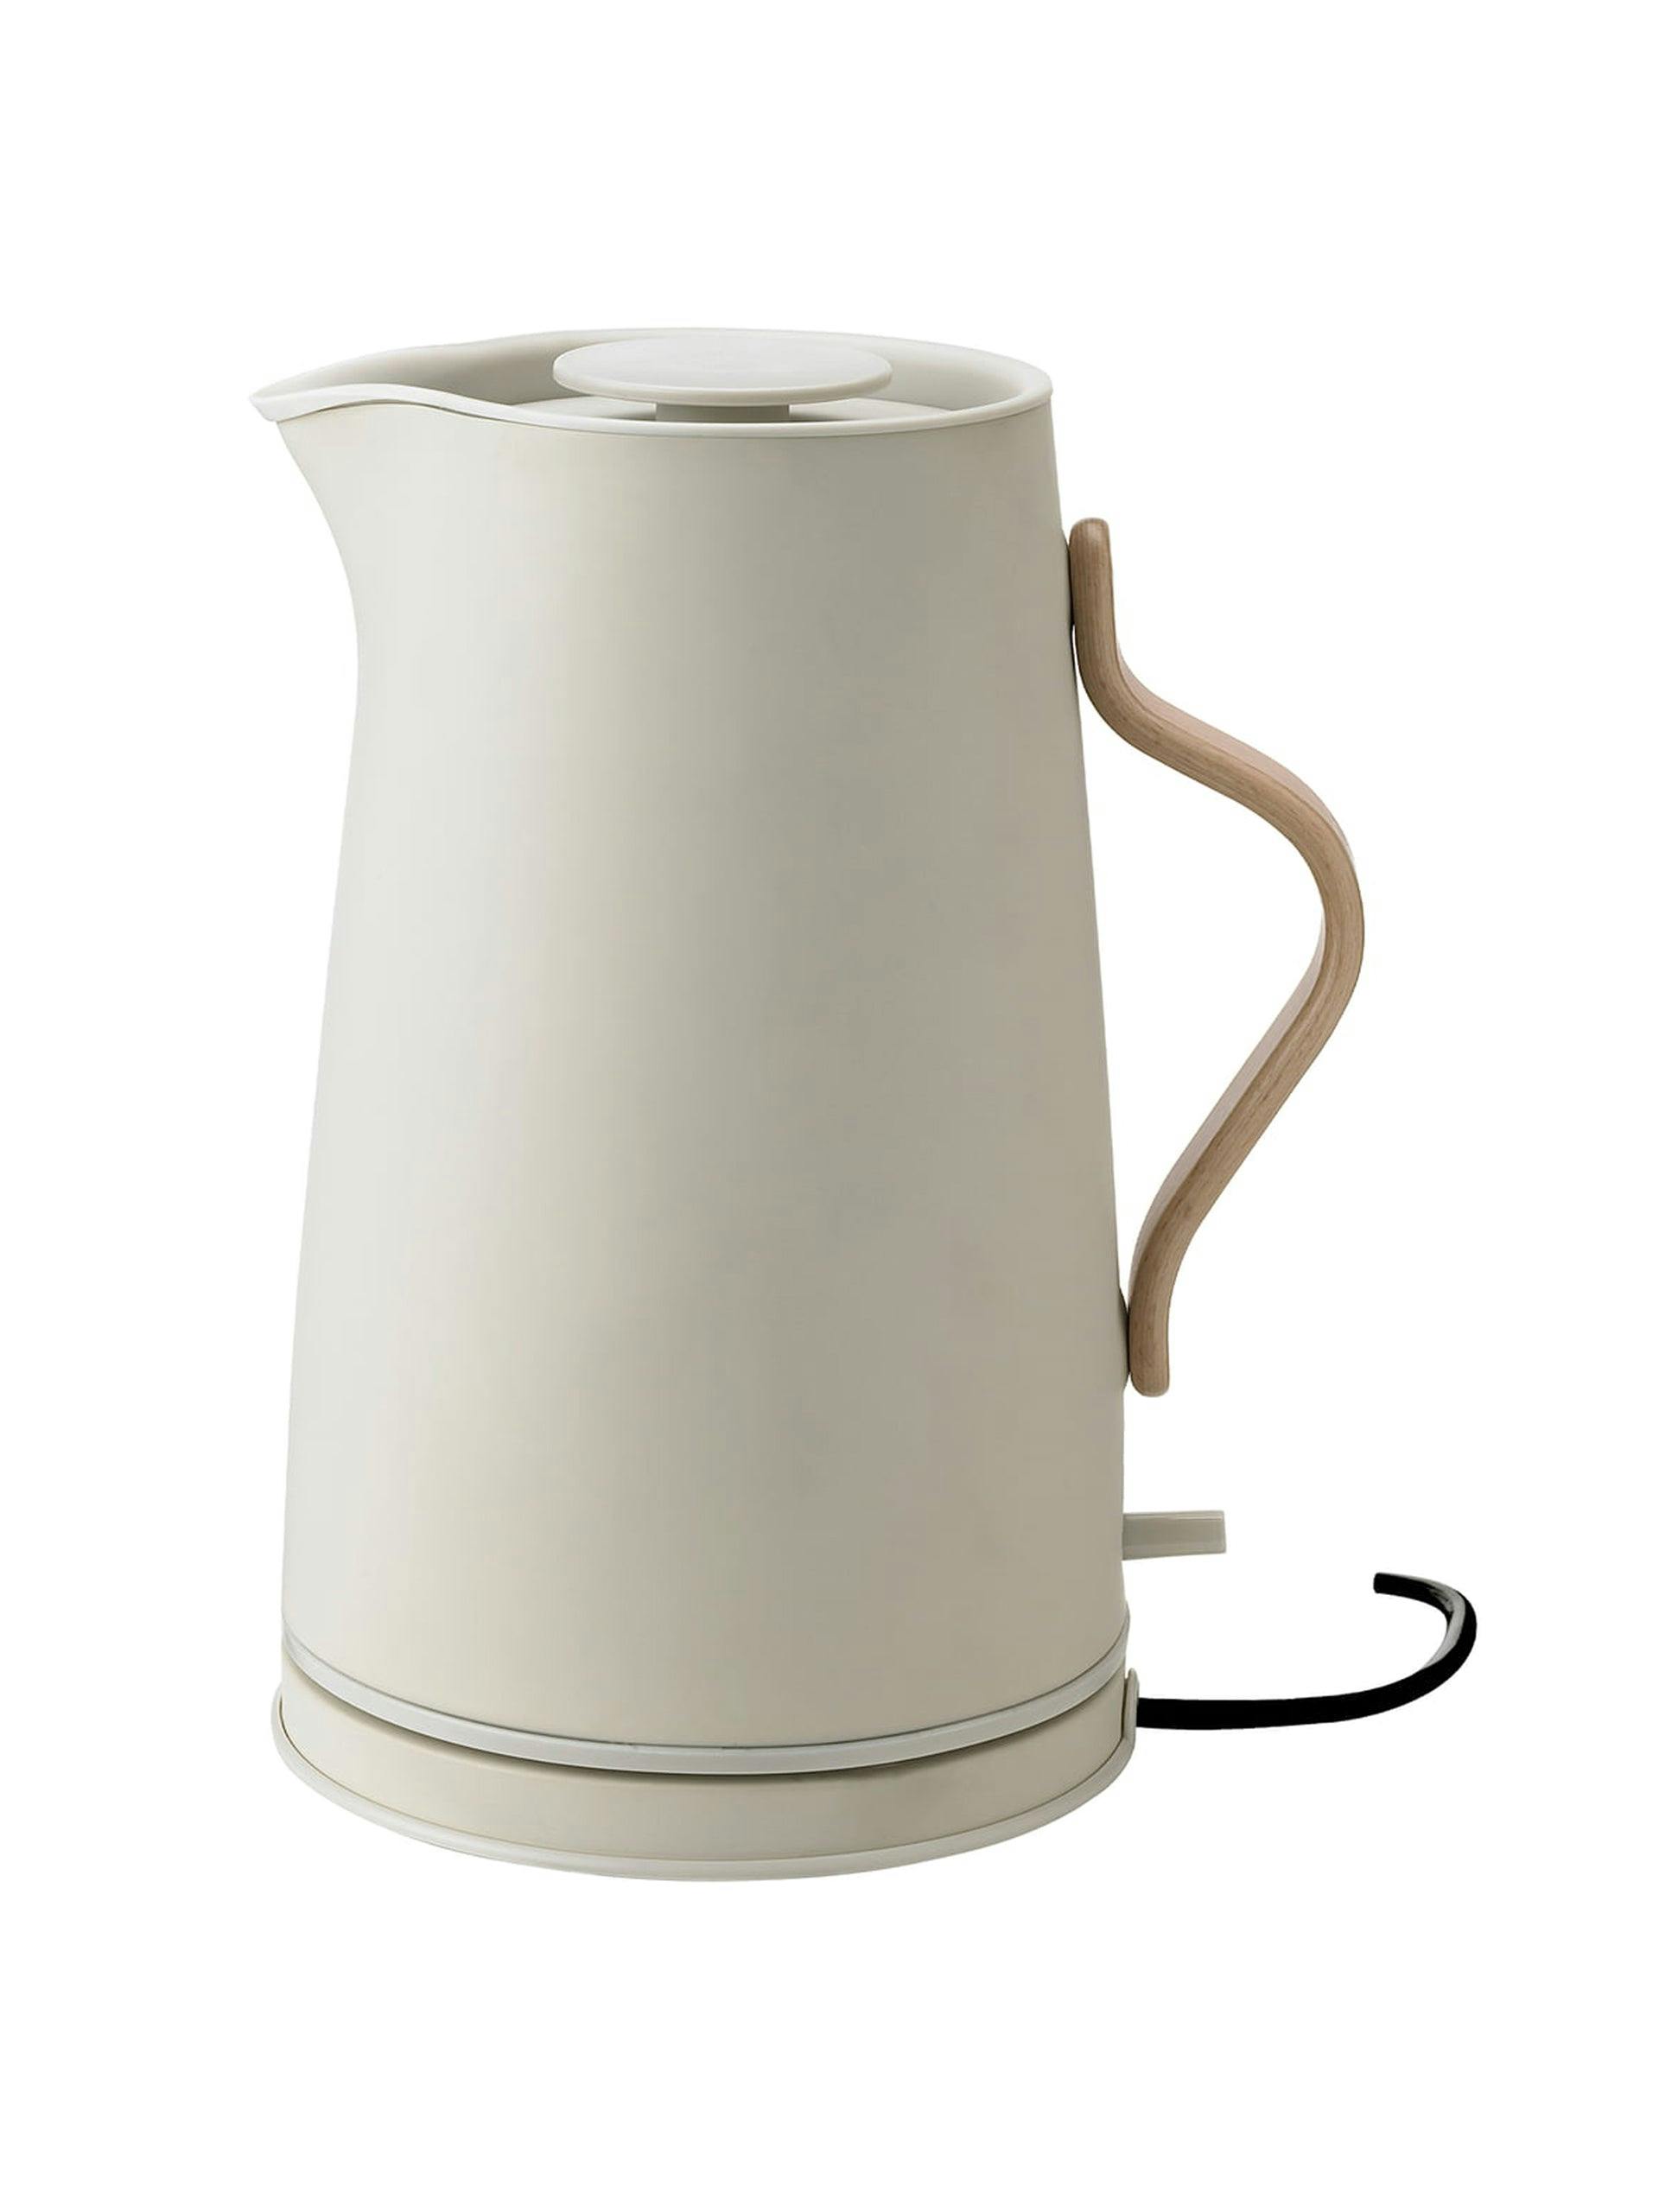 Off-white electric kettle